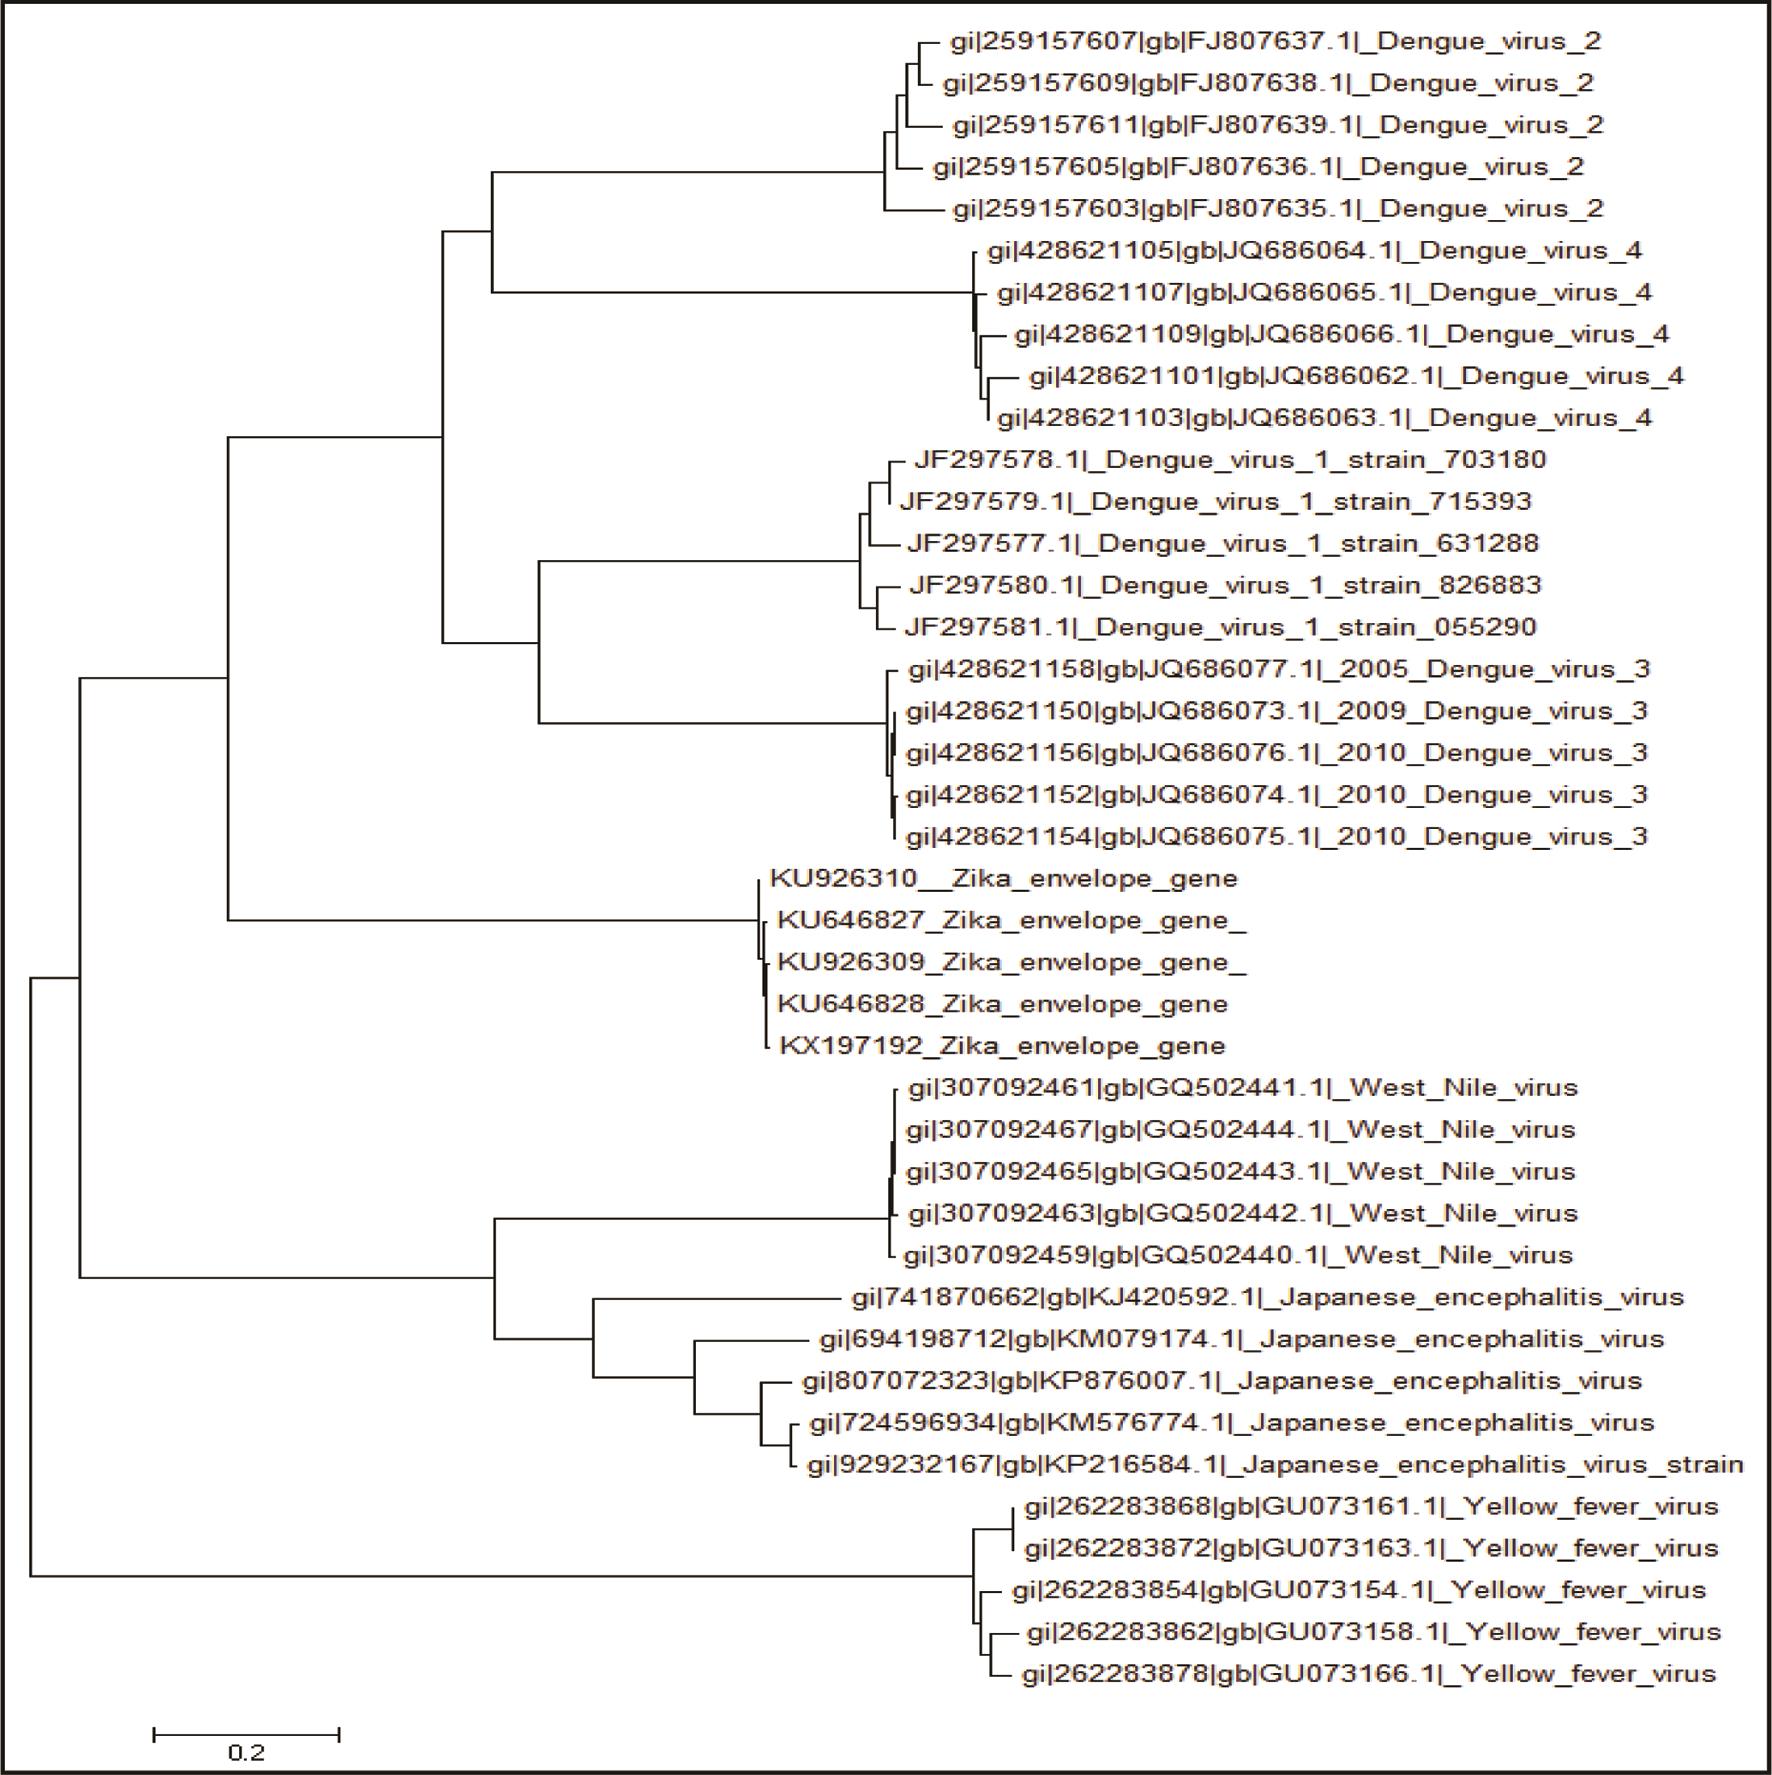 Phylogenetic relationship between the E gene sequences of different <italic>Flavivirus</italic> members from various countries.